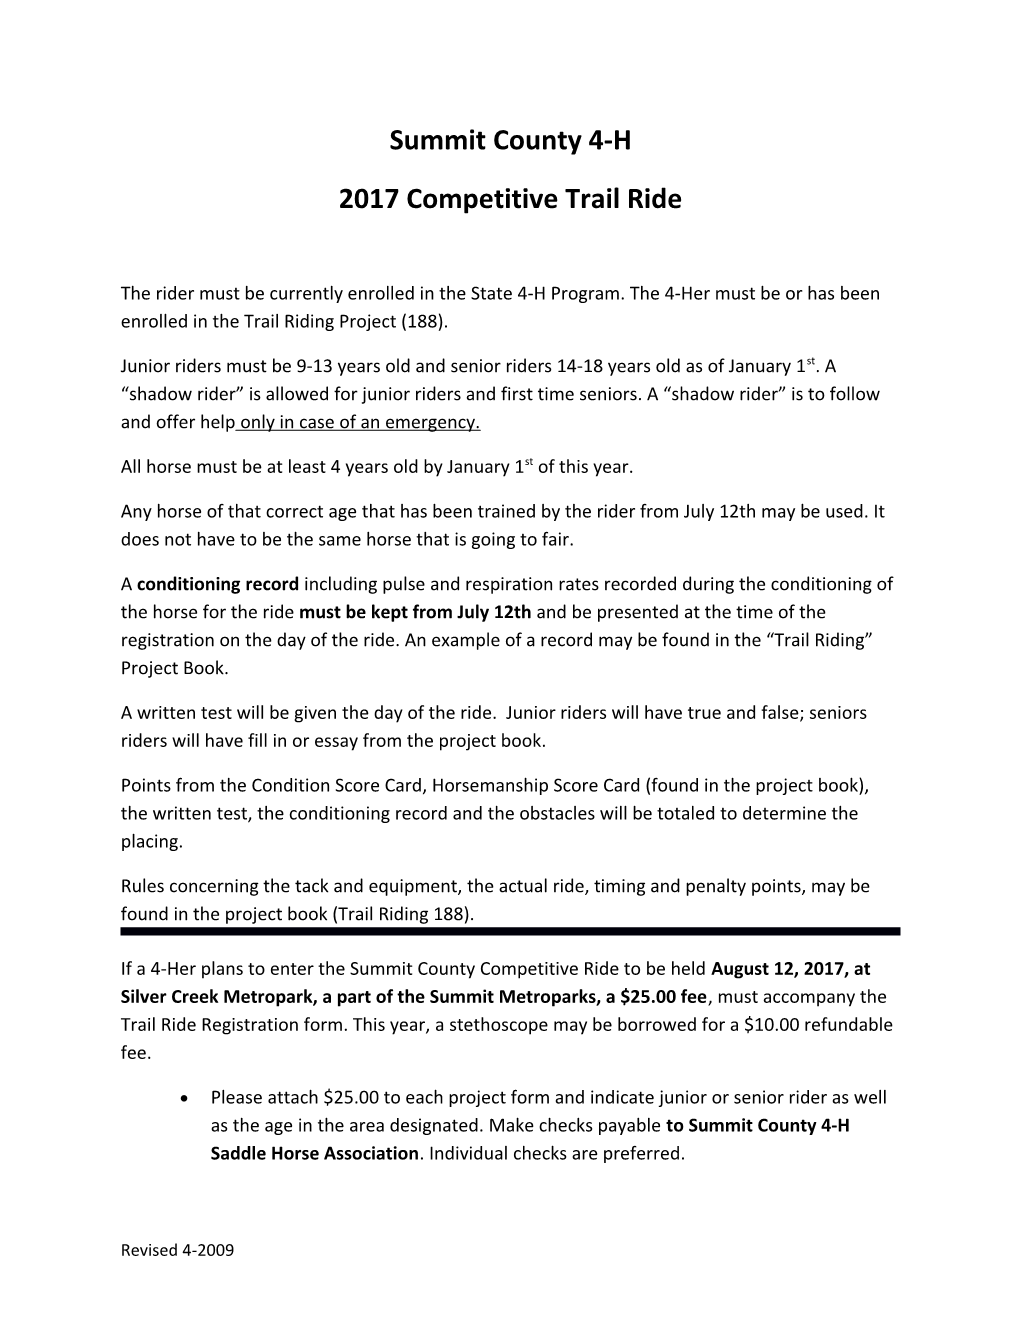 2013 Competitive Trail Registration Packet